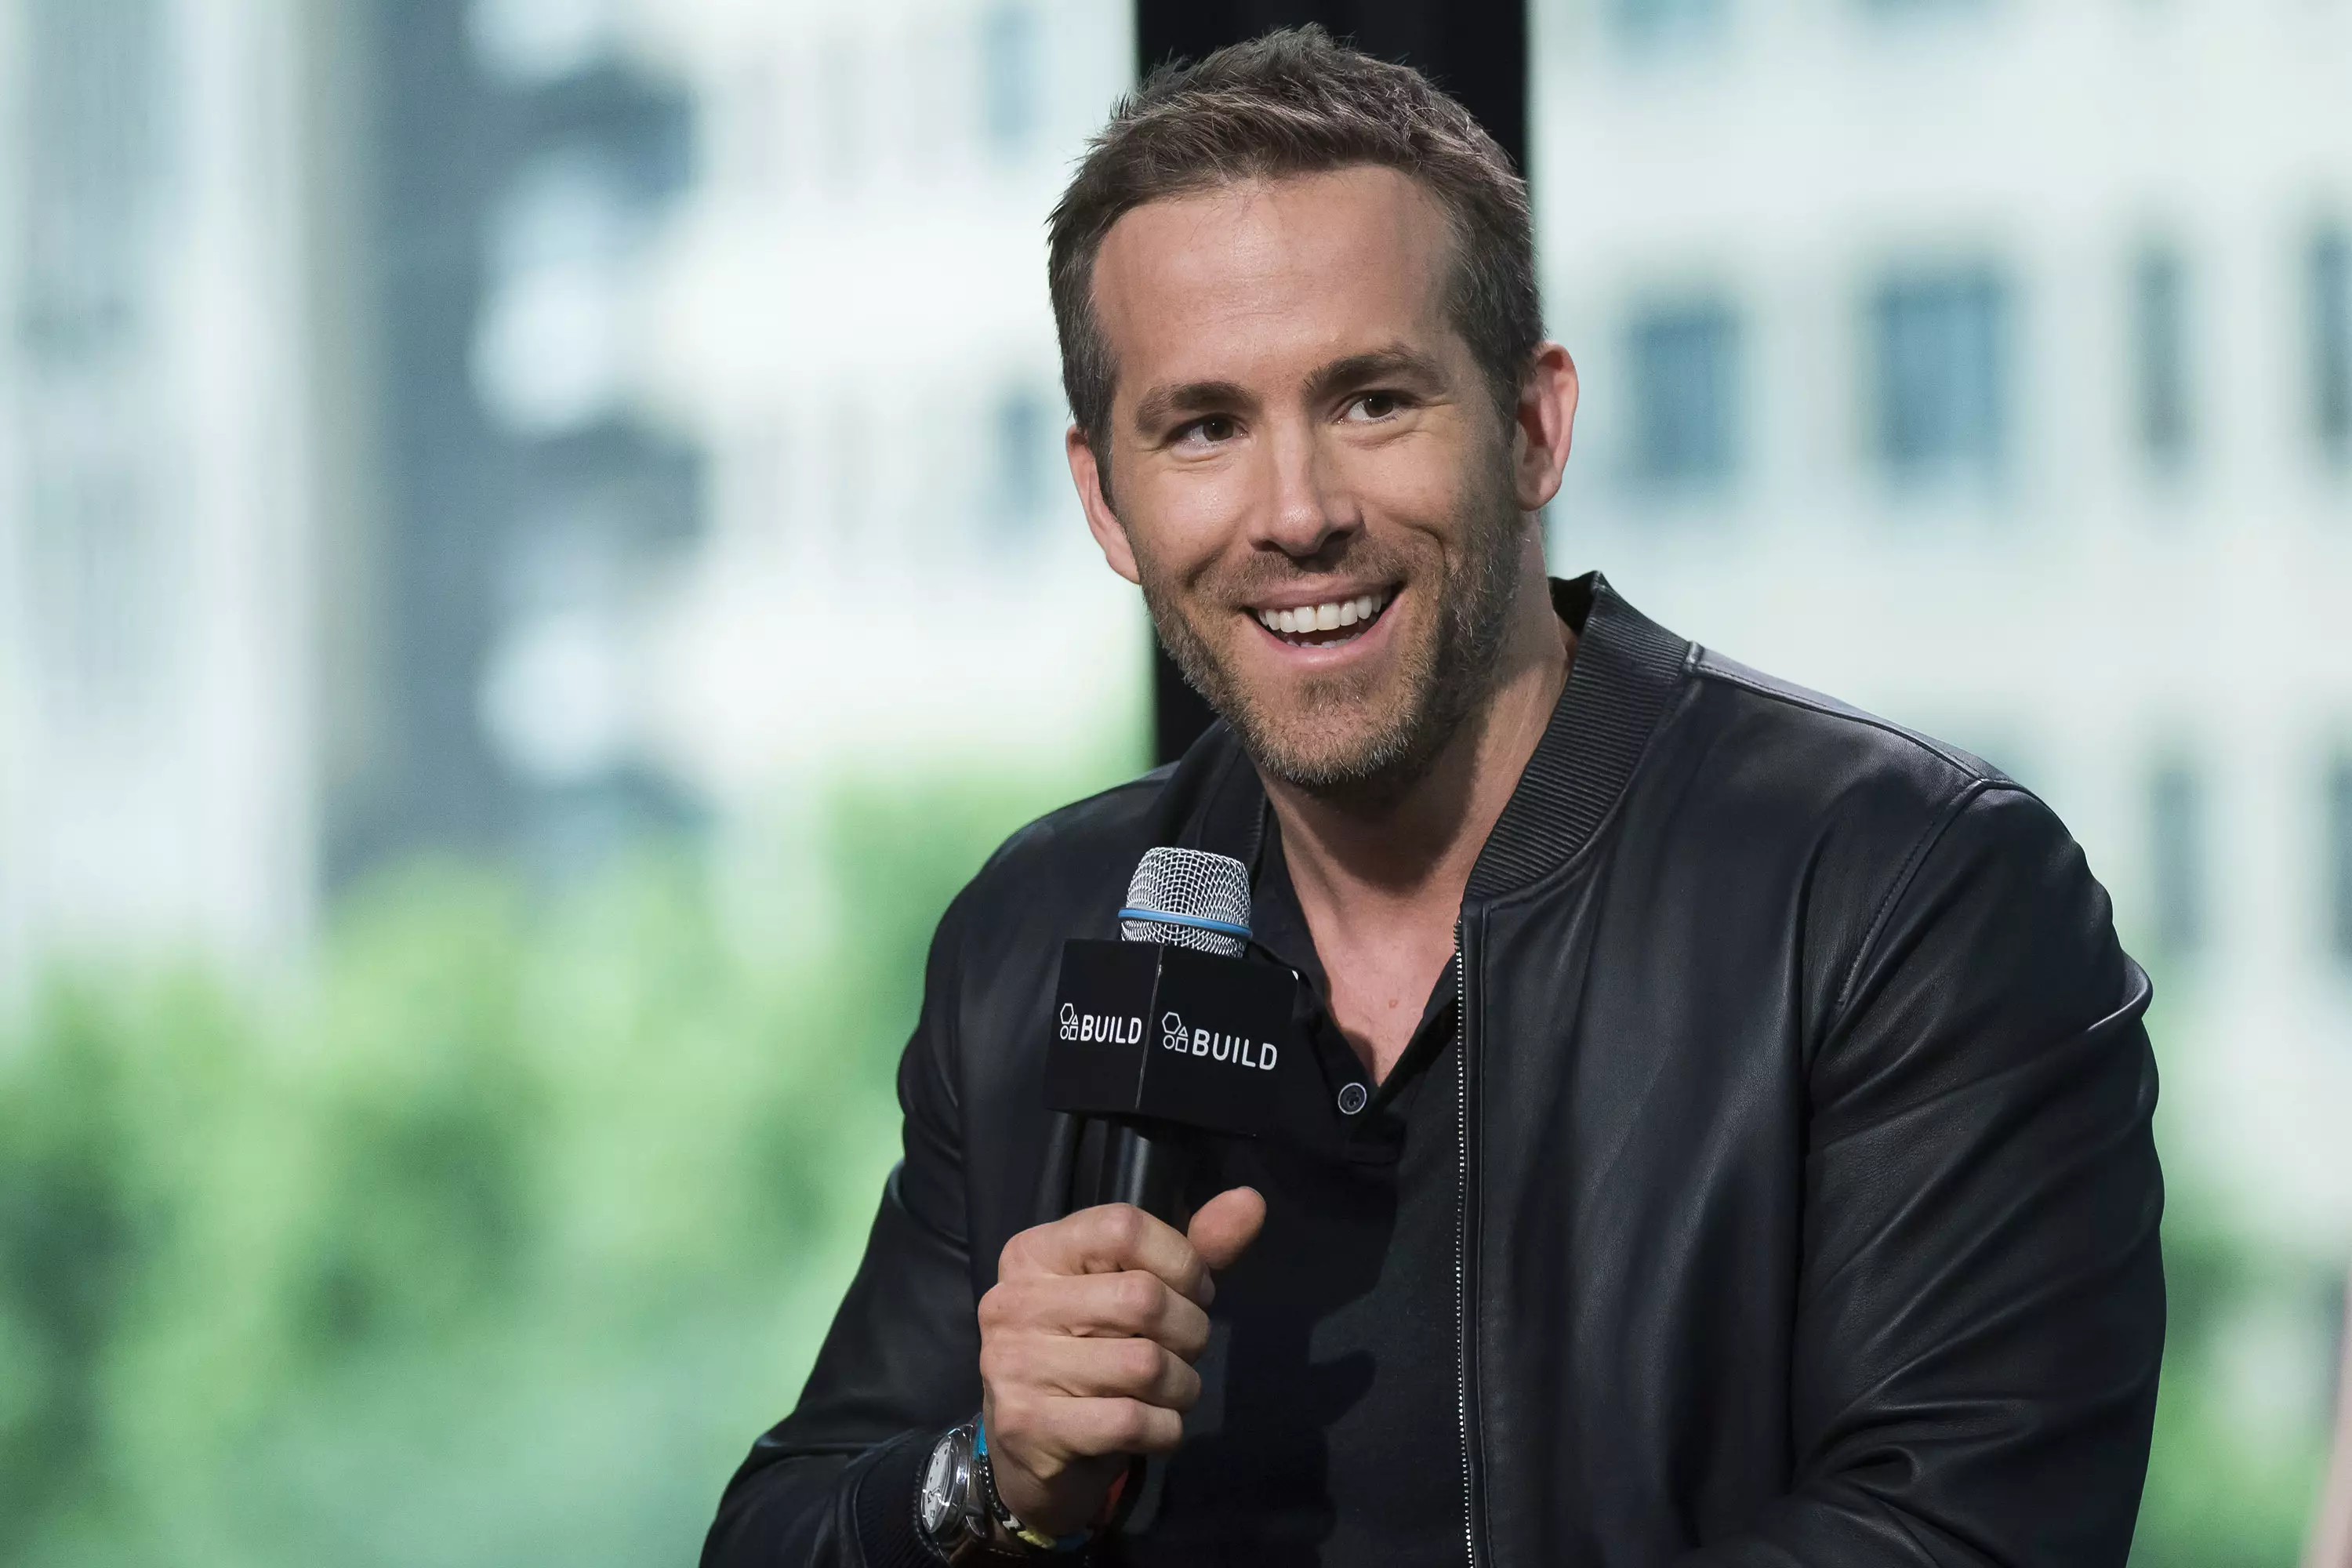 Ryan Reynolds Has The Most Original Banter And Is Hilarious On Twitter